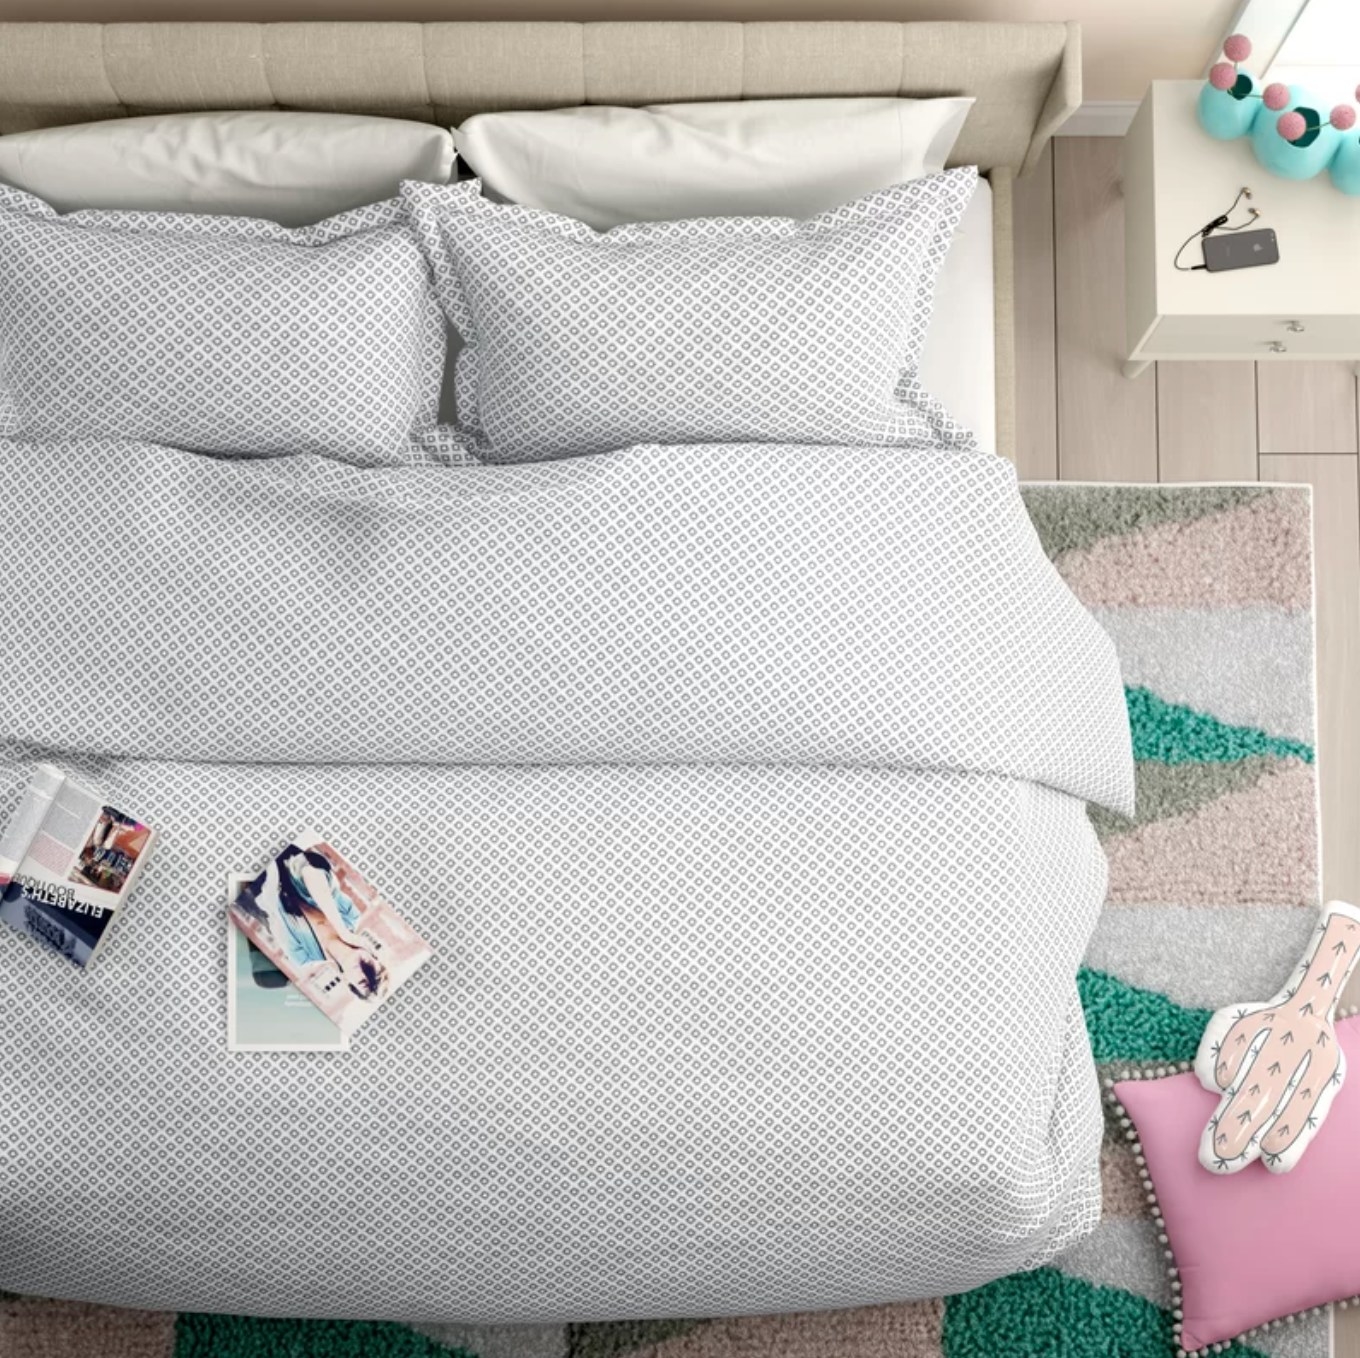 The duvet cover on a bed, sitting atop a colorful rug